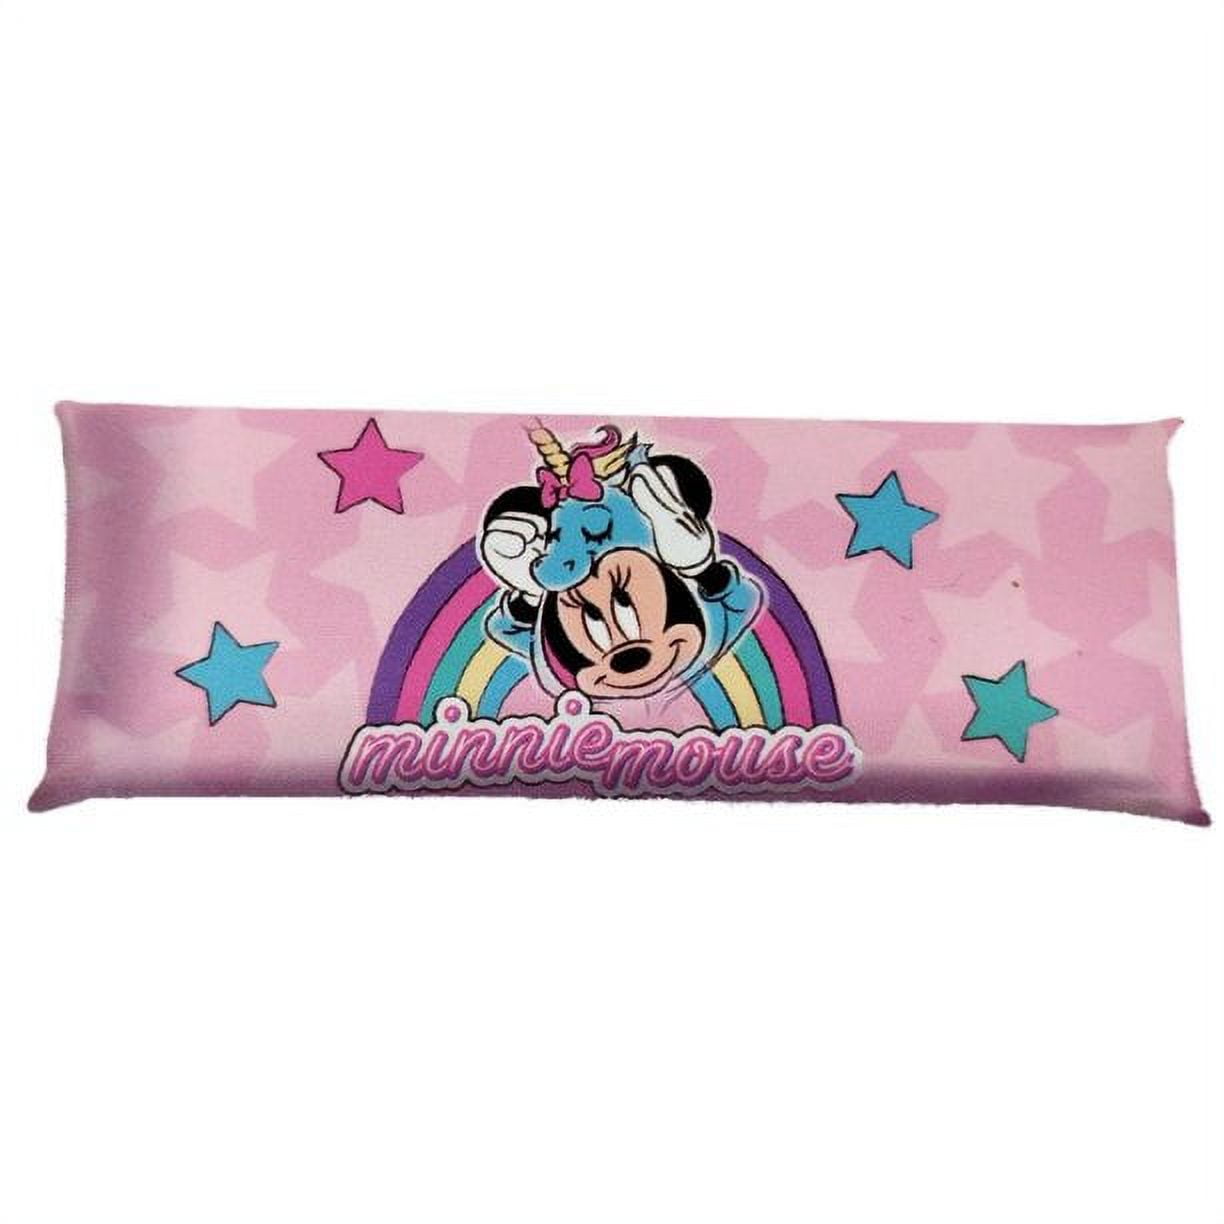 Disney Mickey Mouse Red Peekaboo 20x54 inch Body Pillow Cover, 100